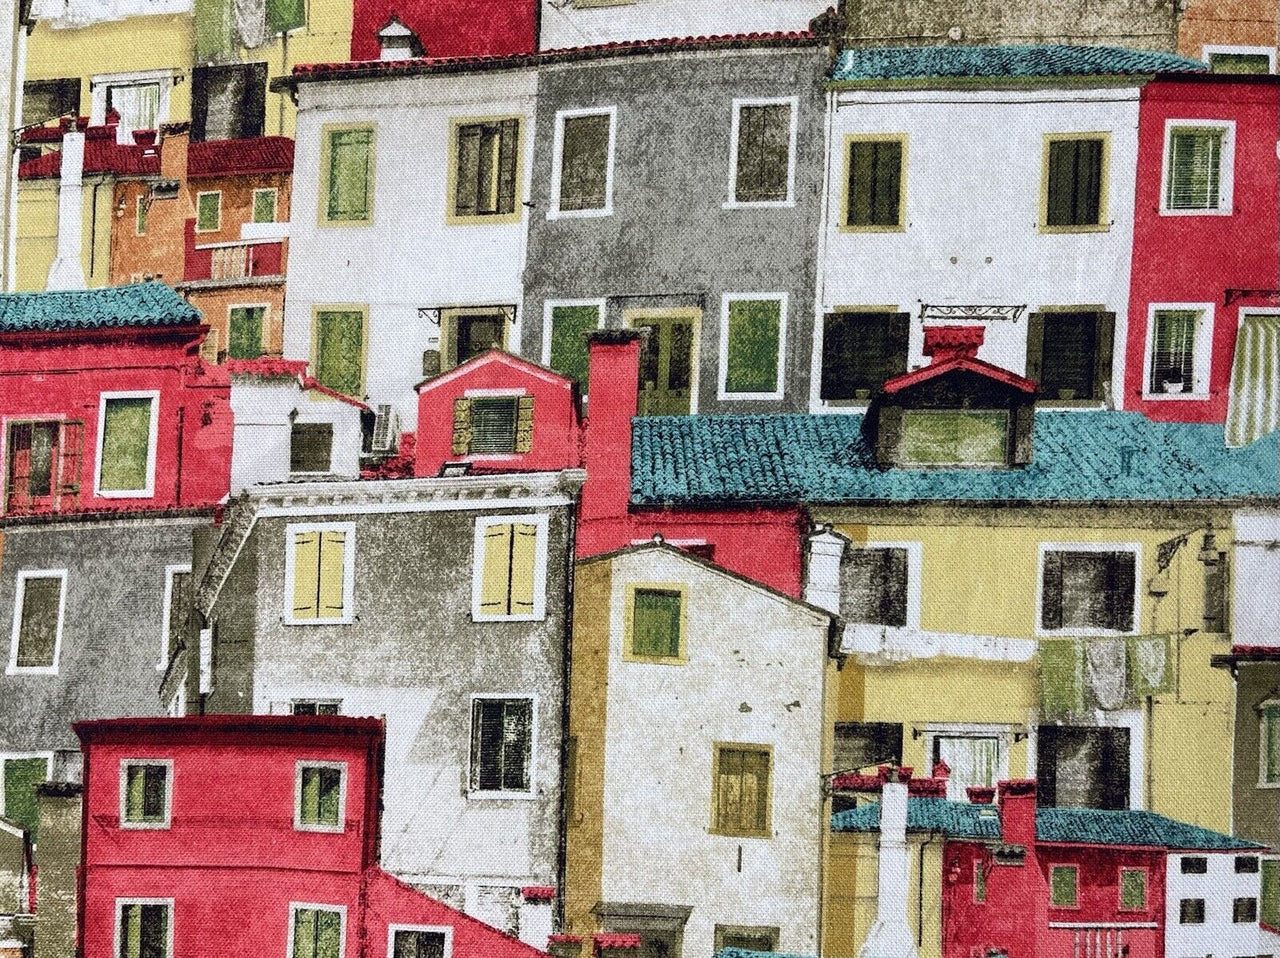 Positano Village Houses Printed Cotton Fabric By Meter Mediterranean Inspired